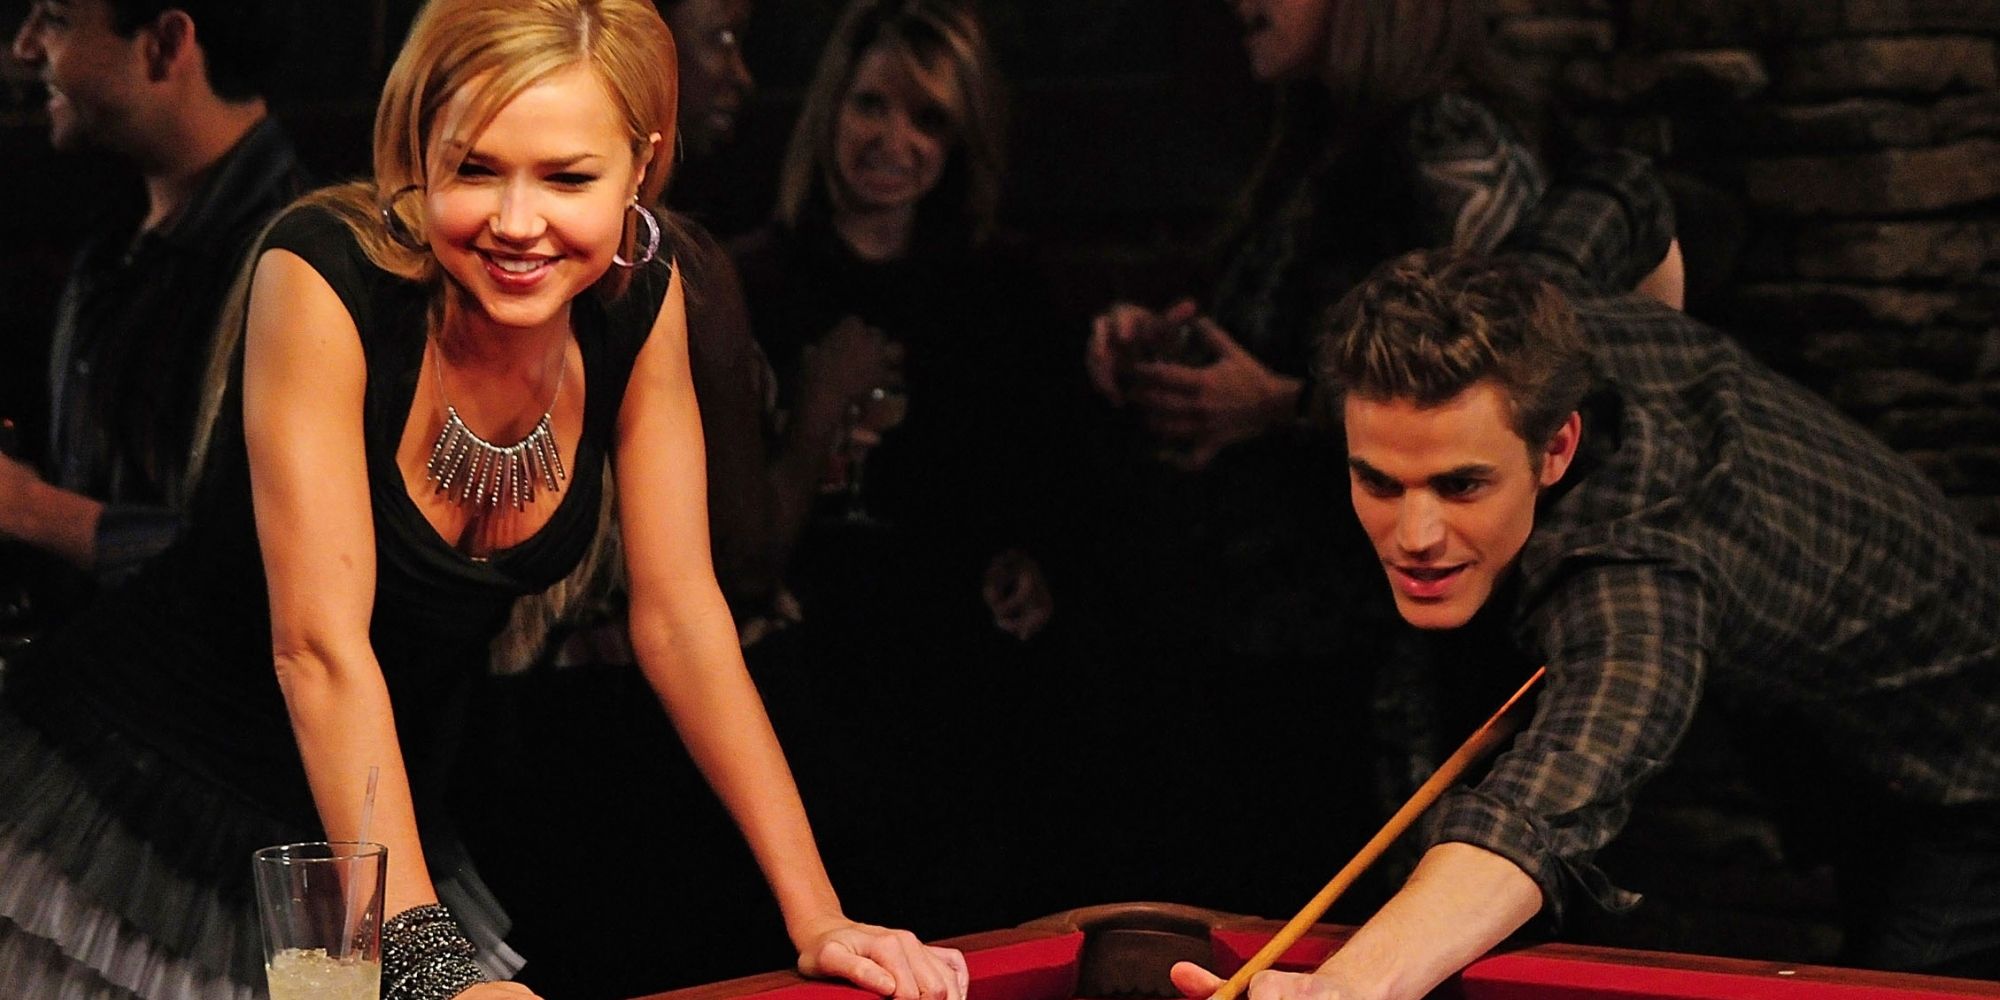 Stefan and Lexi playing pool in The Vampire Diaries.